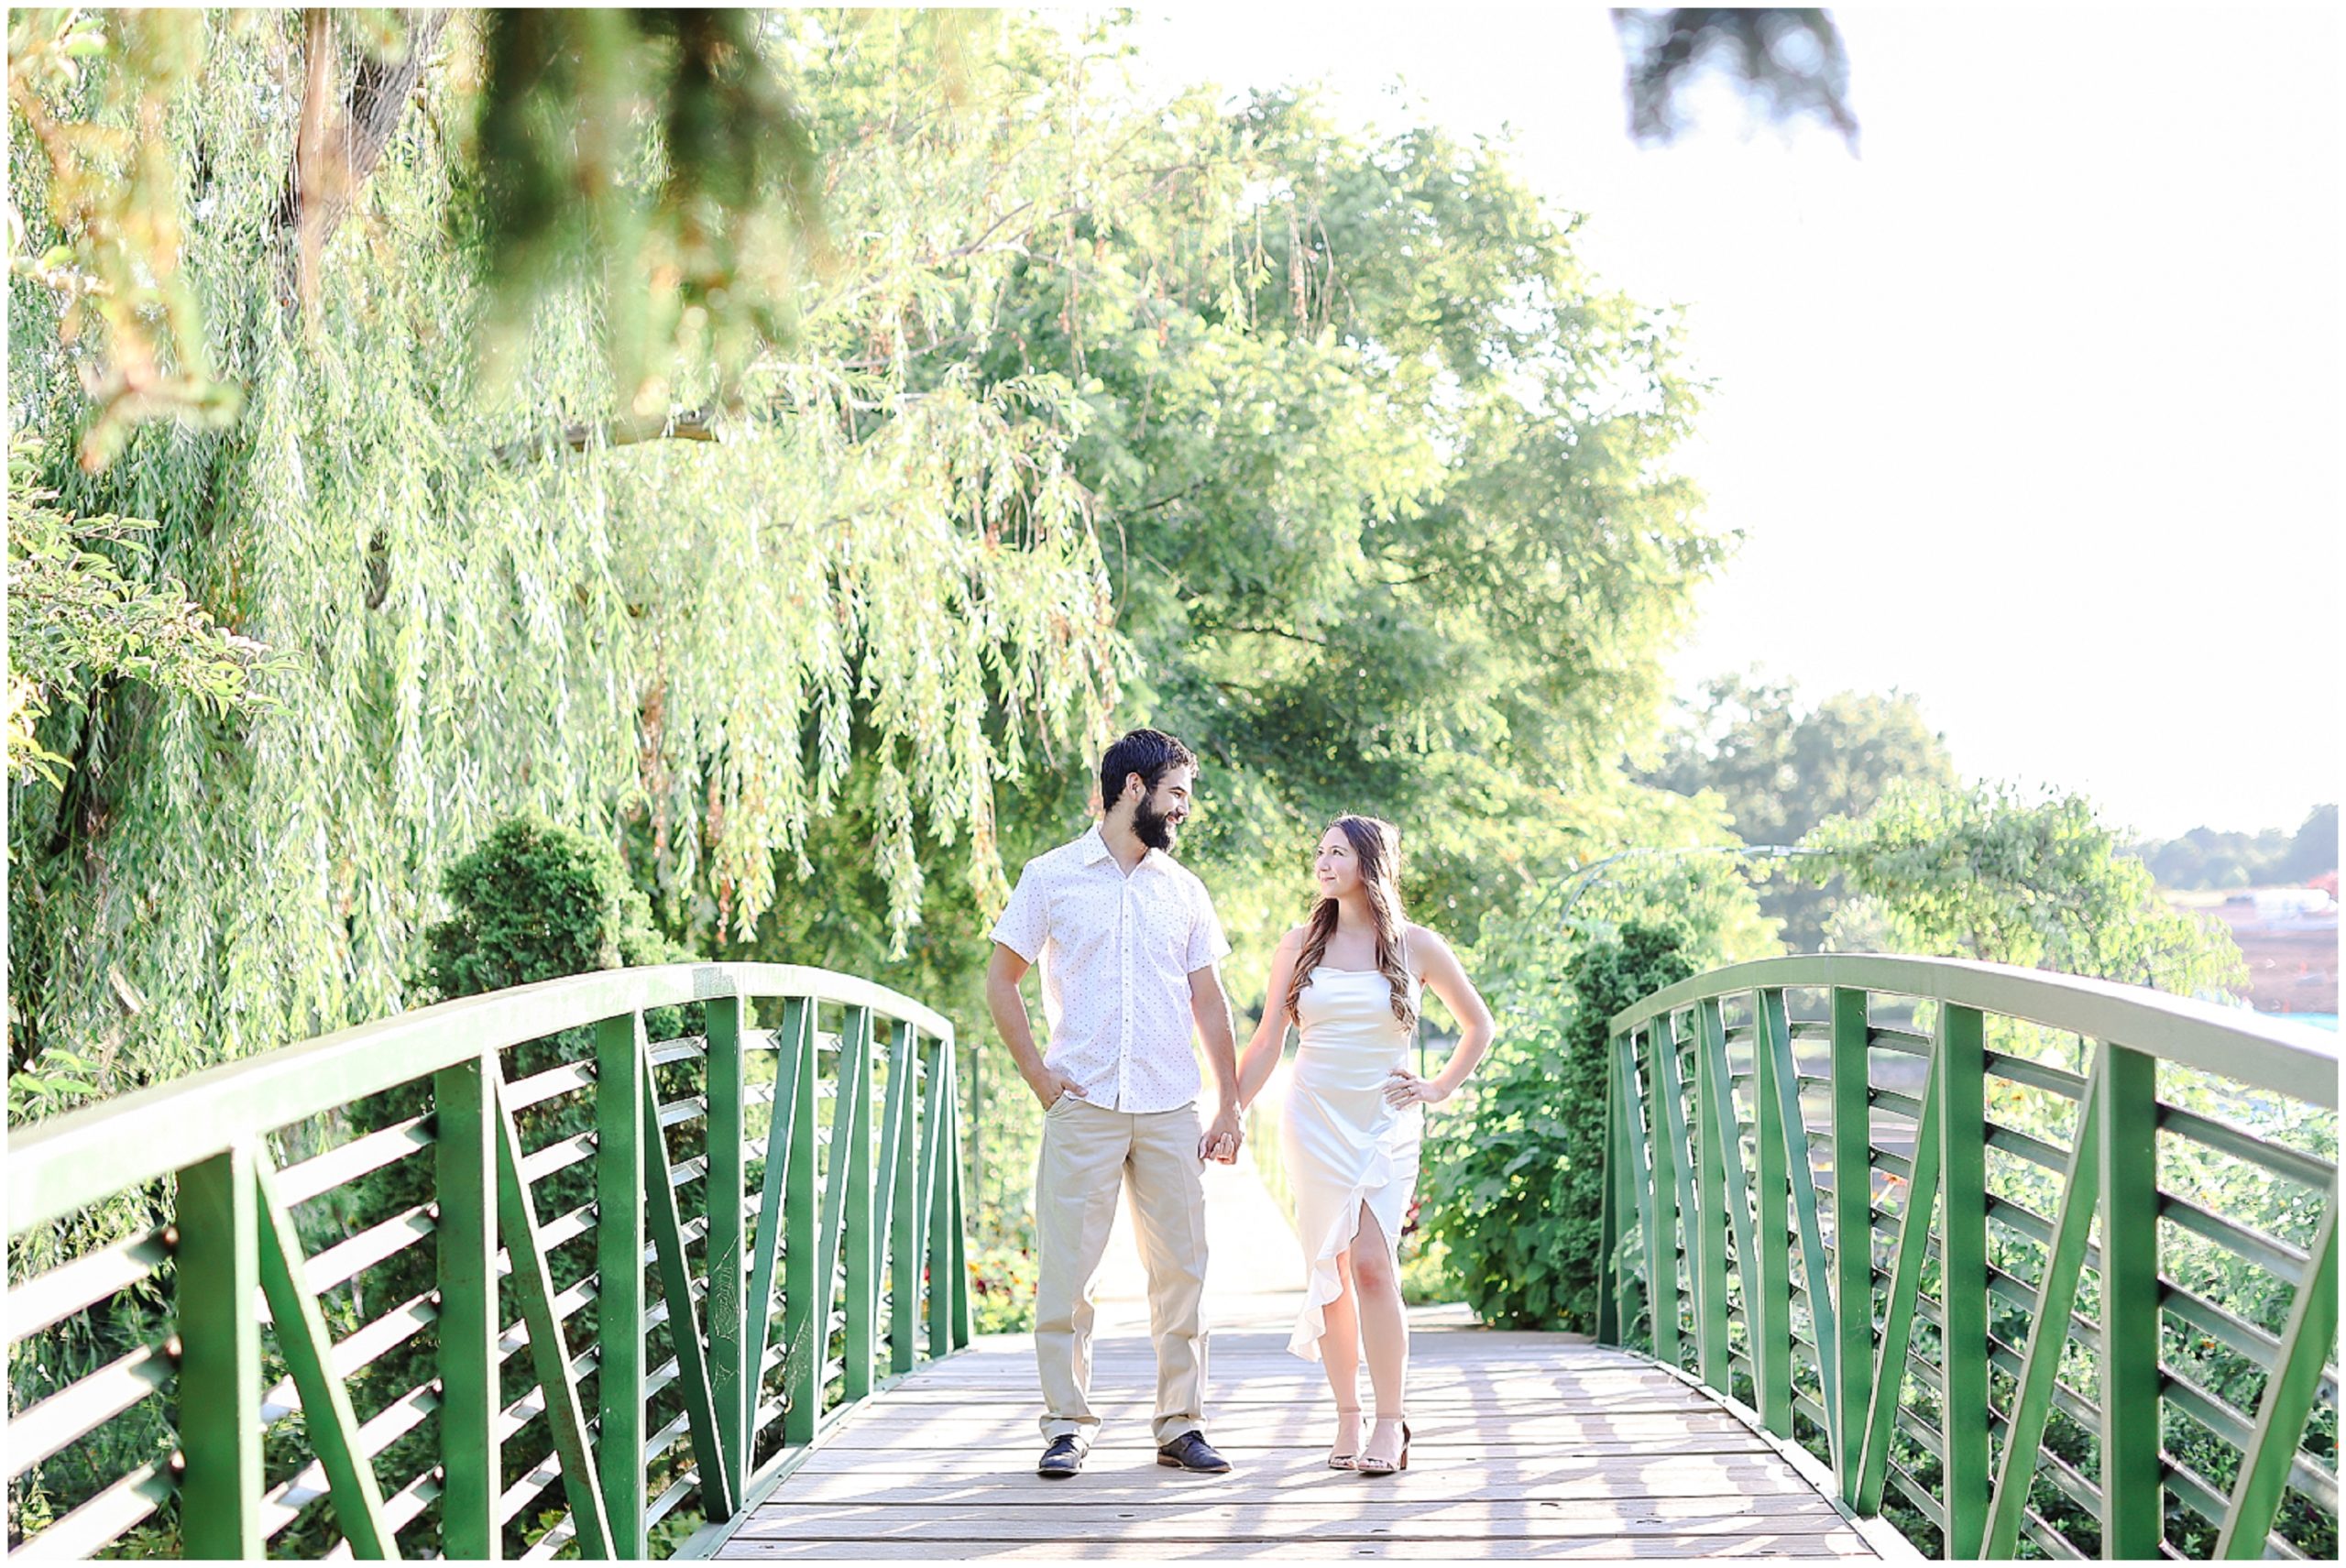 Take a look at this romantic summer engagement session at the Overland Park Arboretum! Family Photos Engagement Photos and Wedding Photos in Kansas City